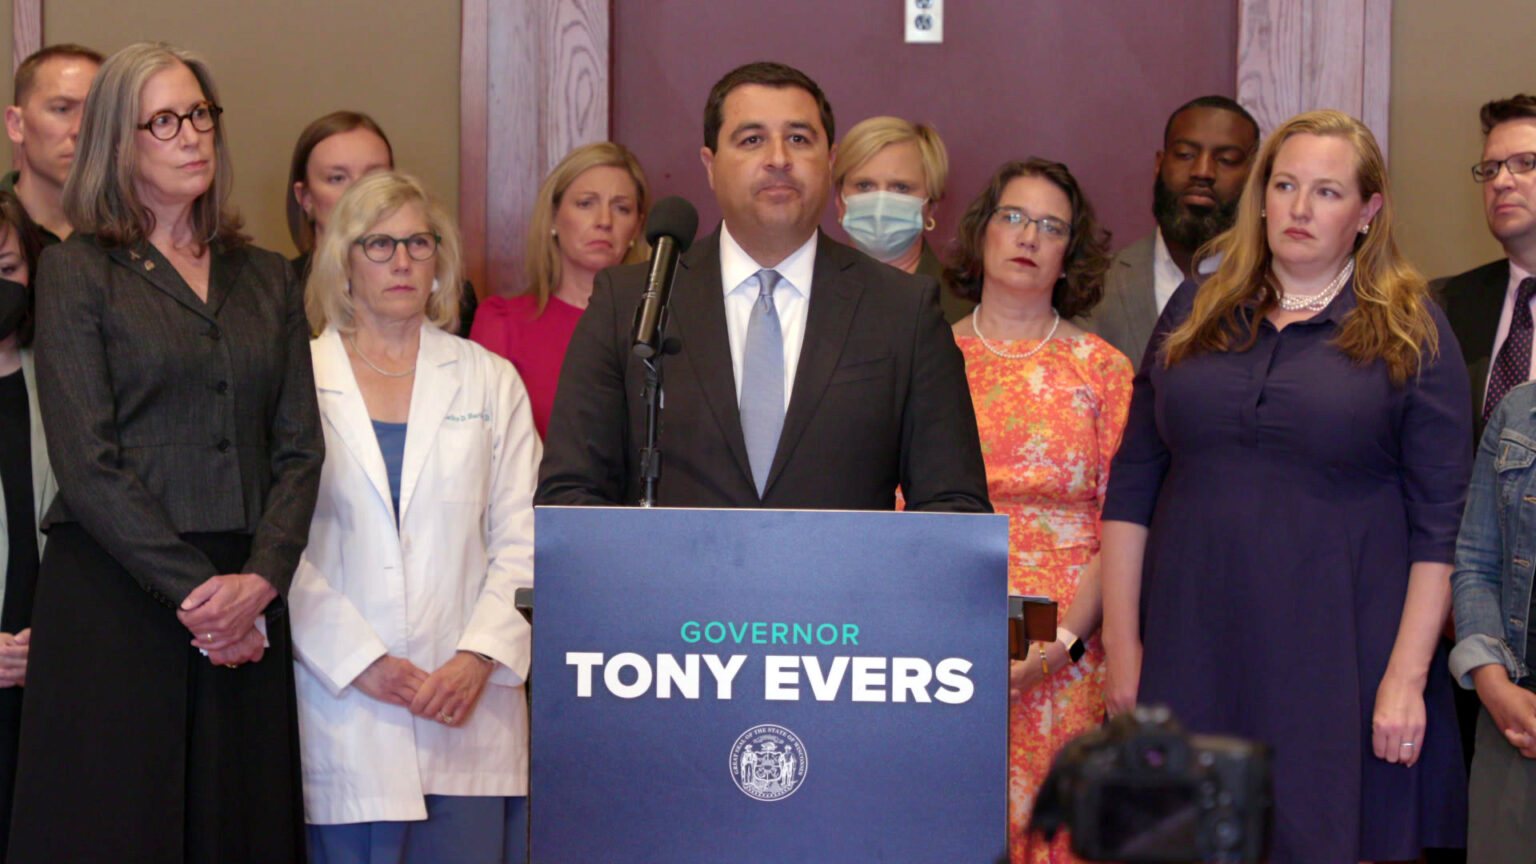 Josh Kaul stands behind a podium with a sign reading Governor Tony Evers with a line of people standing in the background.